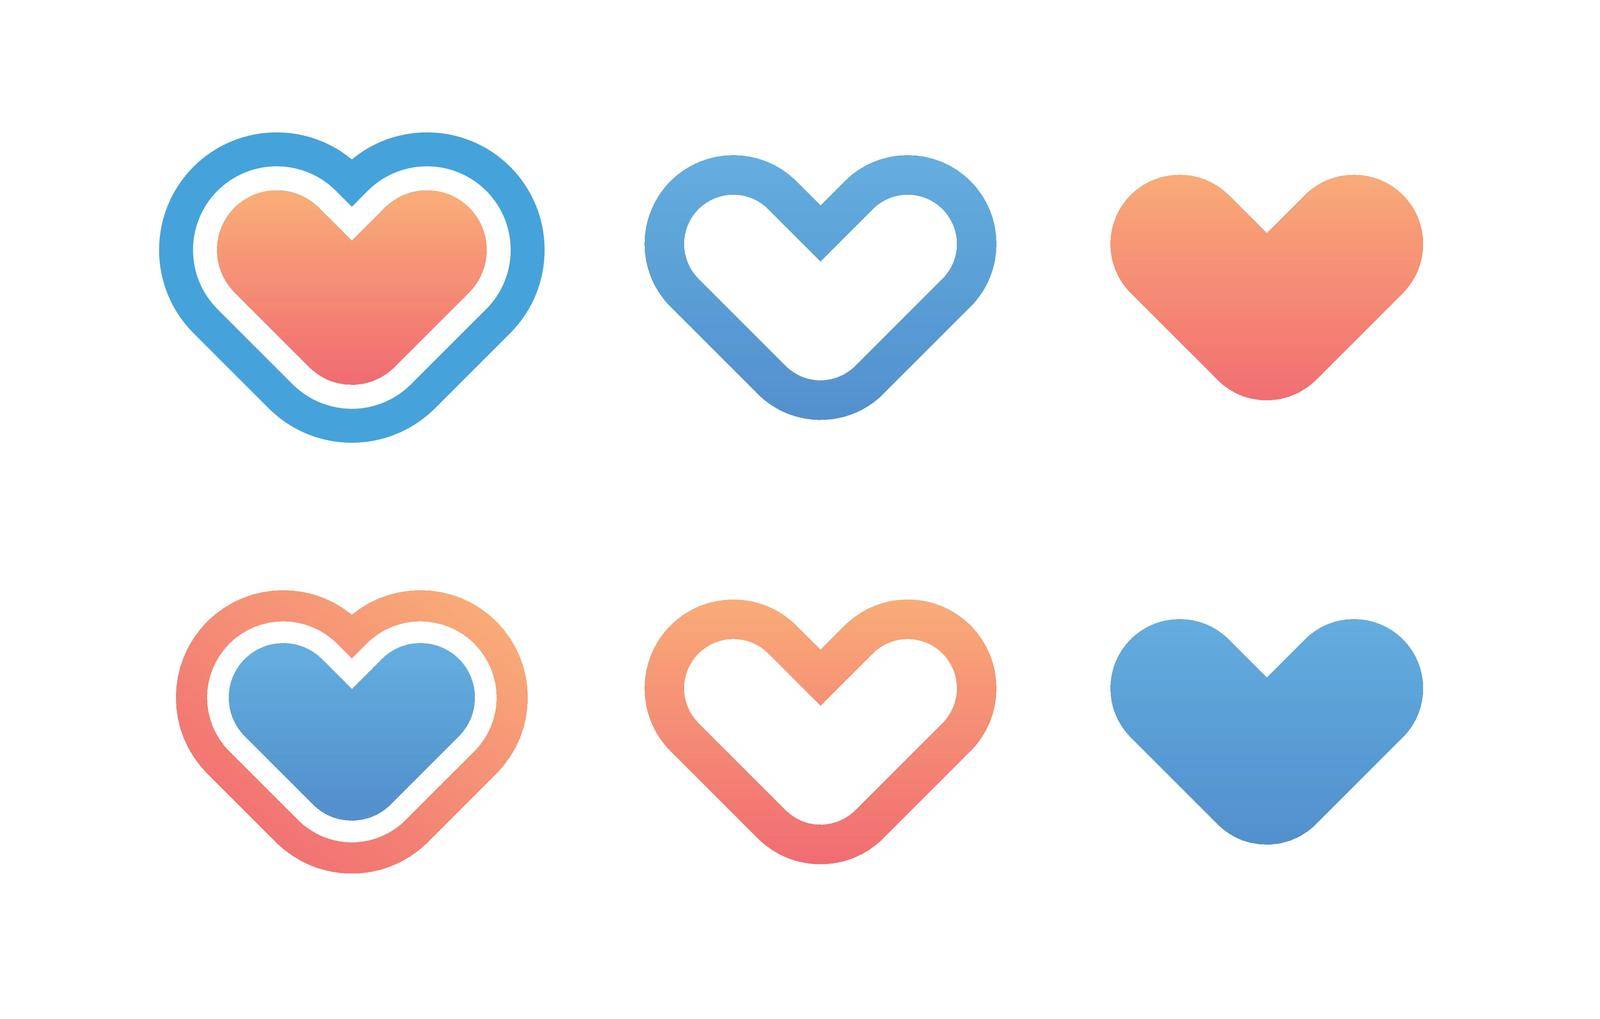 Set of Hearts Icons by macroarting